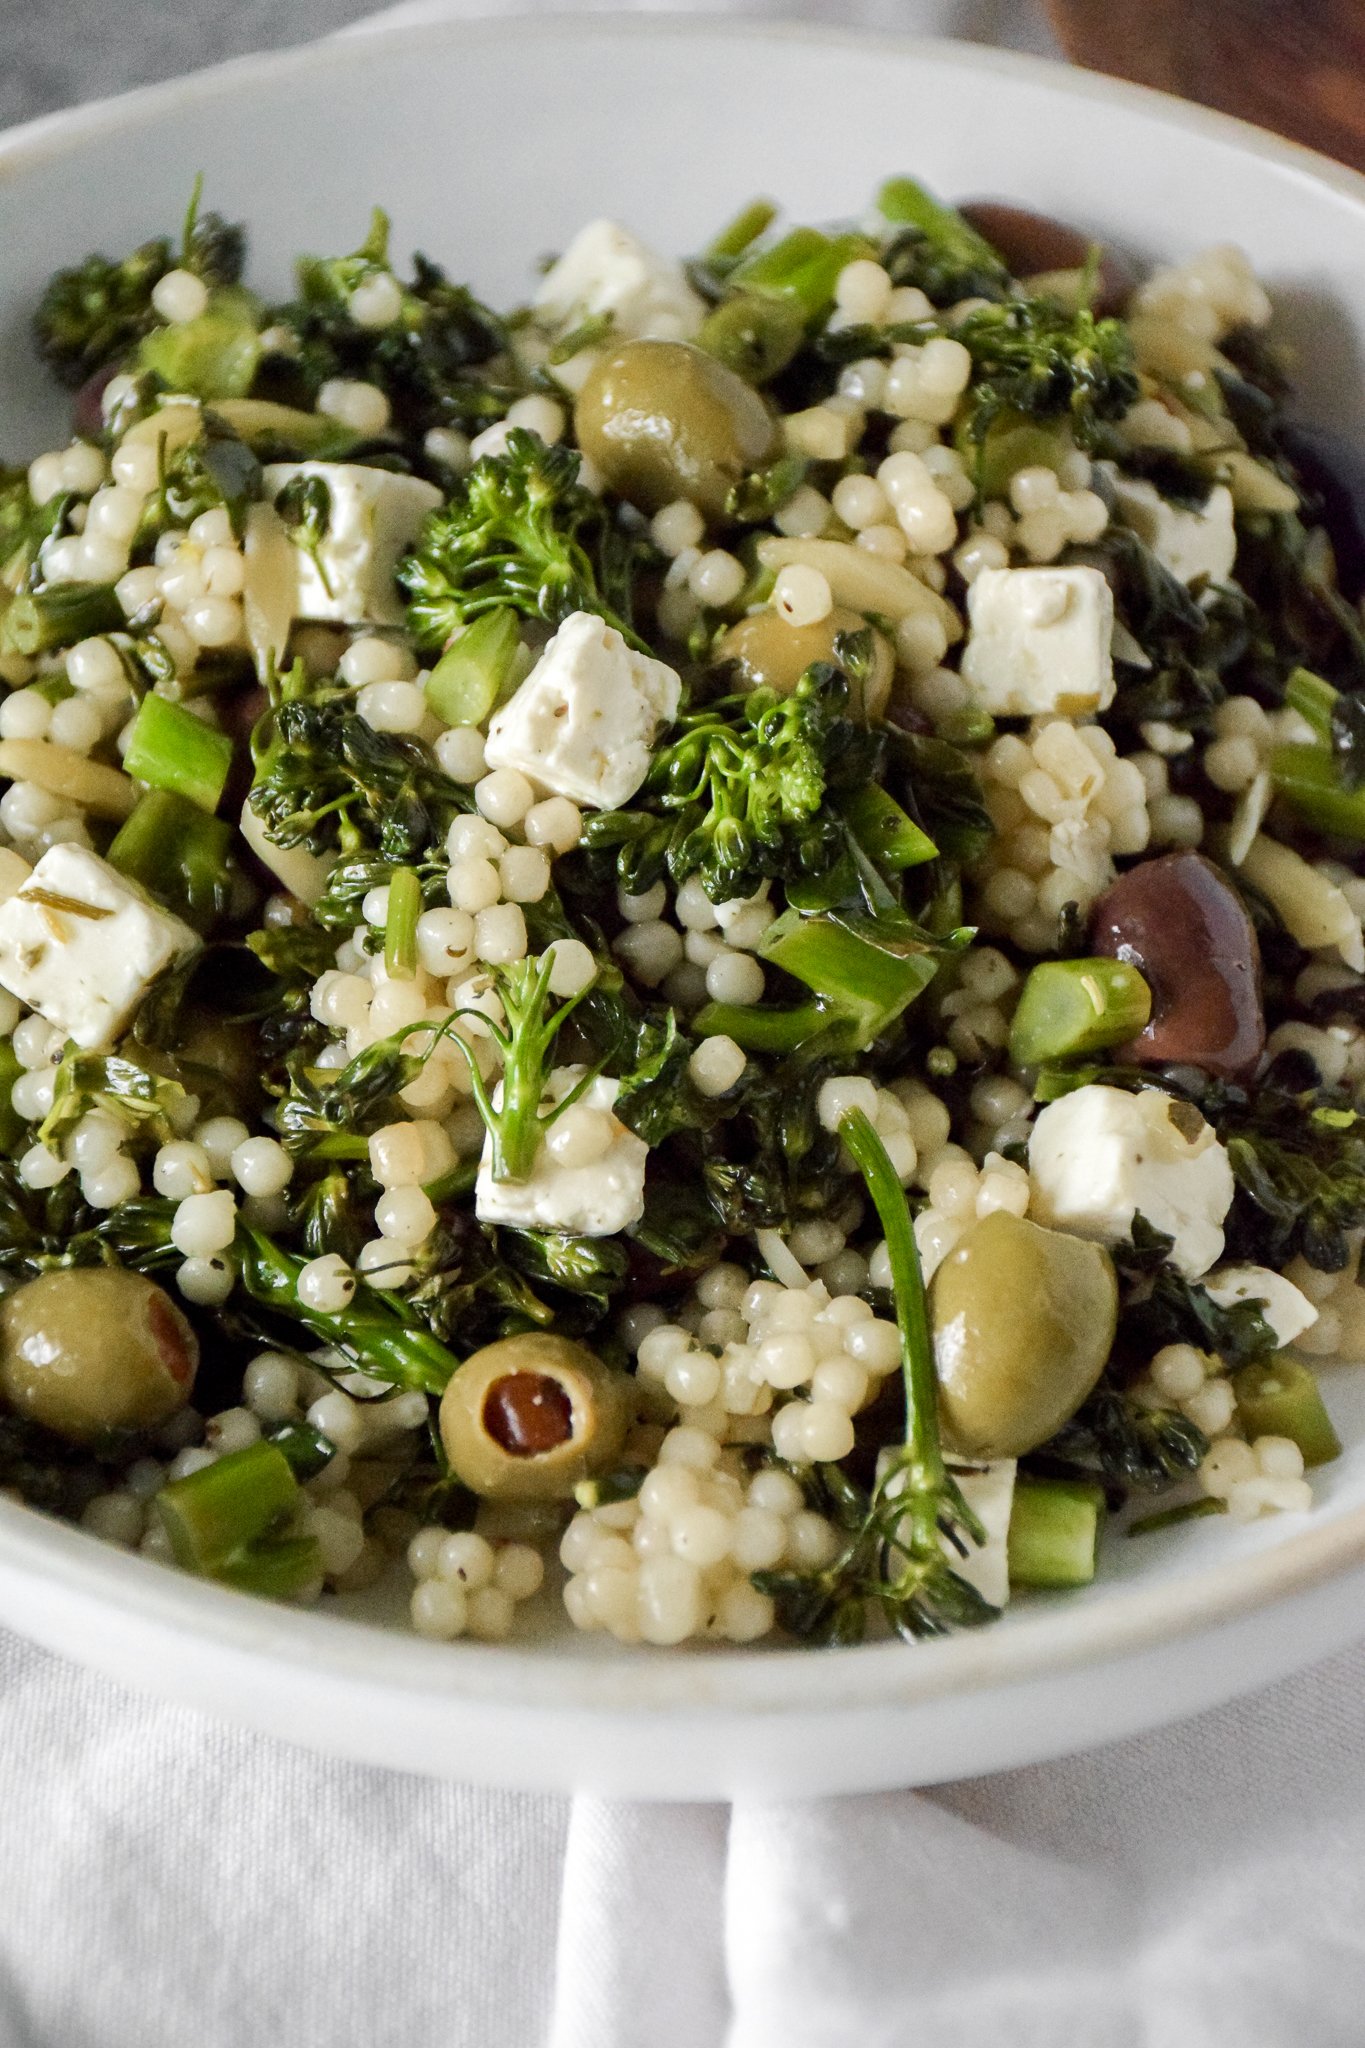 Couscous Broccolini Salad with Olives and Feta